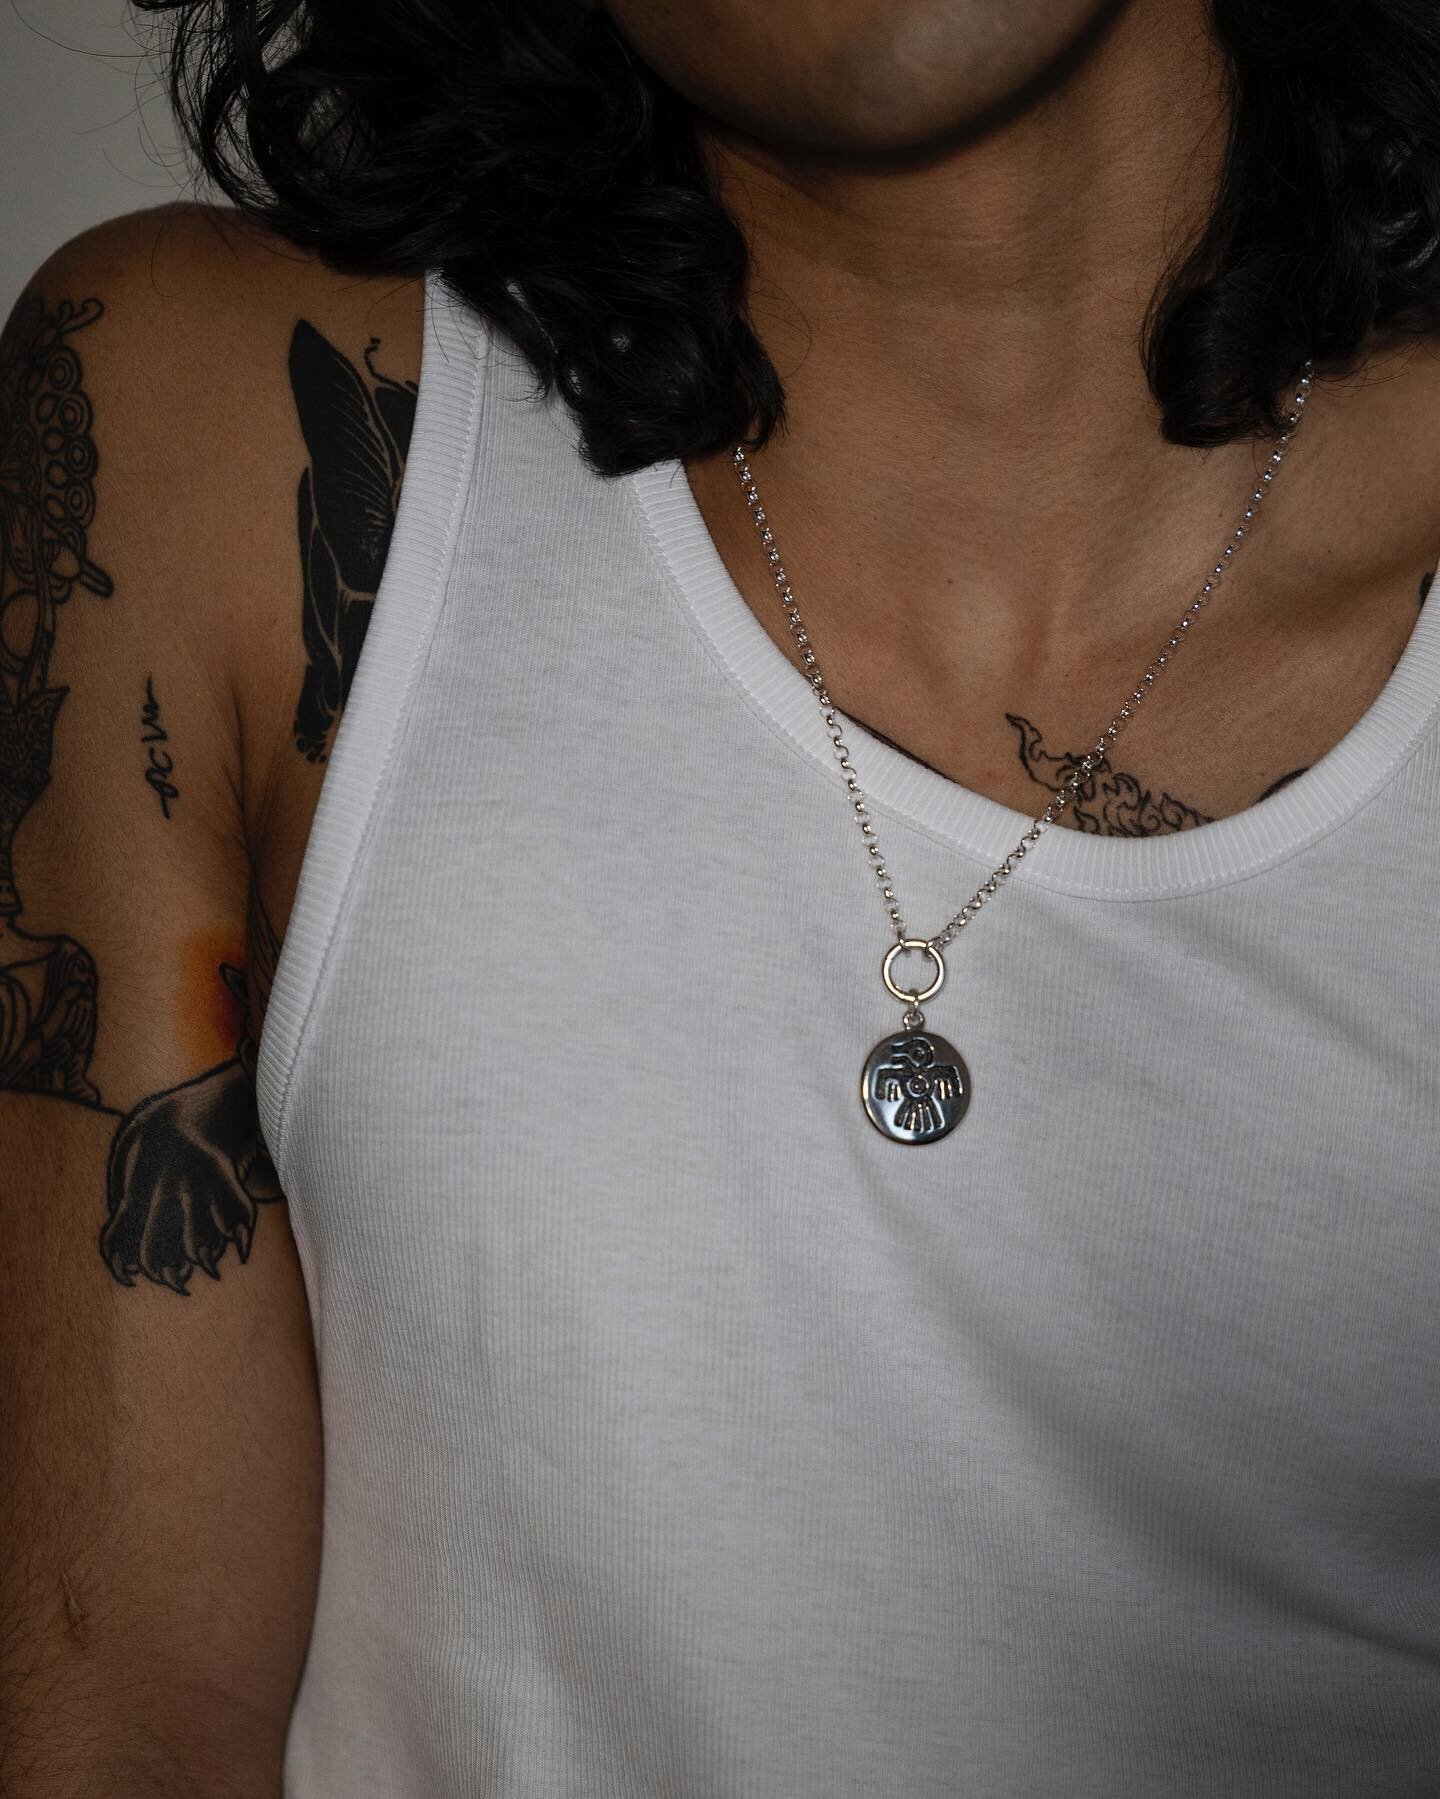 Thunderbird-bearer of happiness☀️

the classic chain is the perfect layering piece, wear it alone, with one of our statement pendants or add your personal favorite to create your own unique expression.

Link to web shop in bio🌟